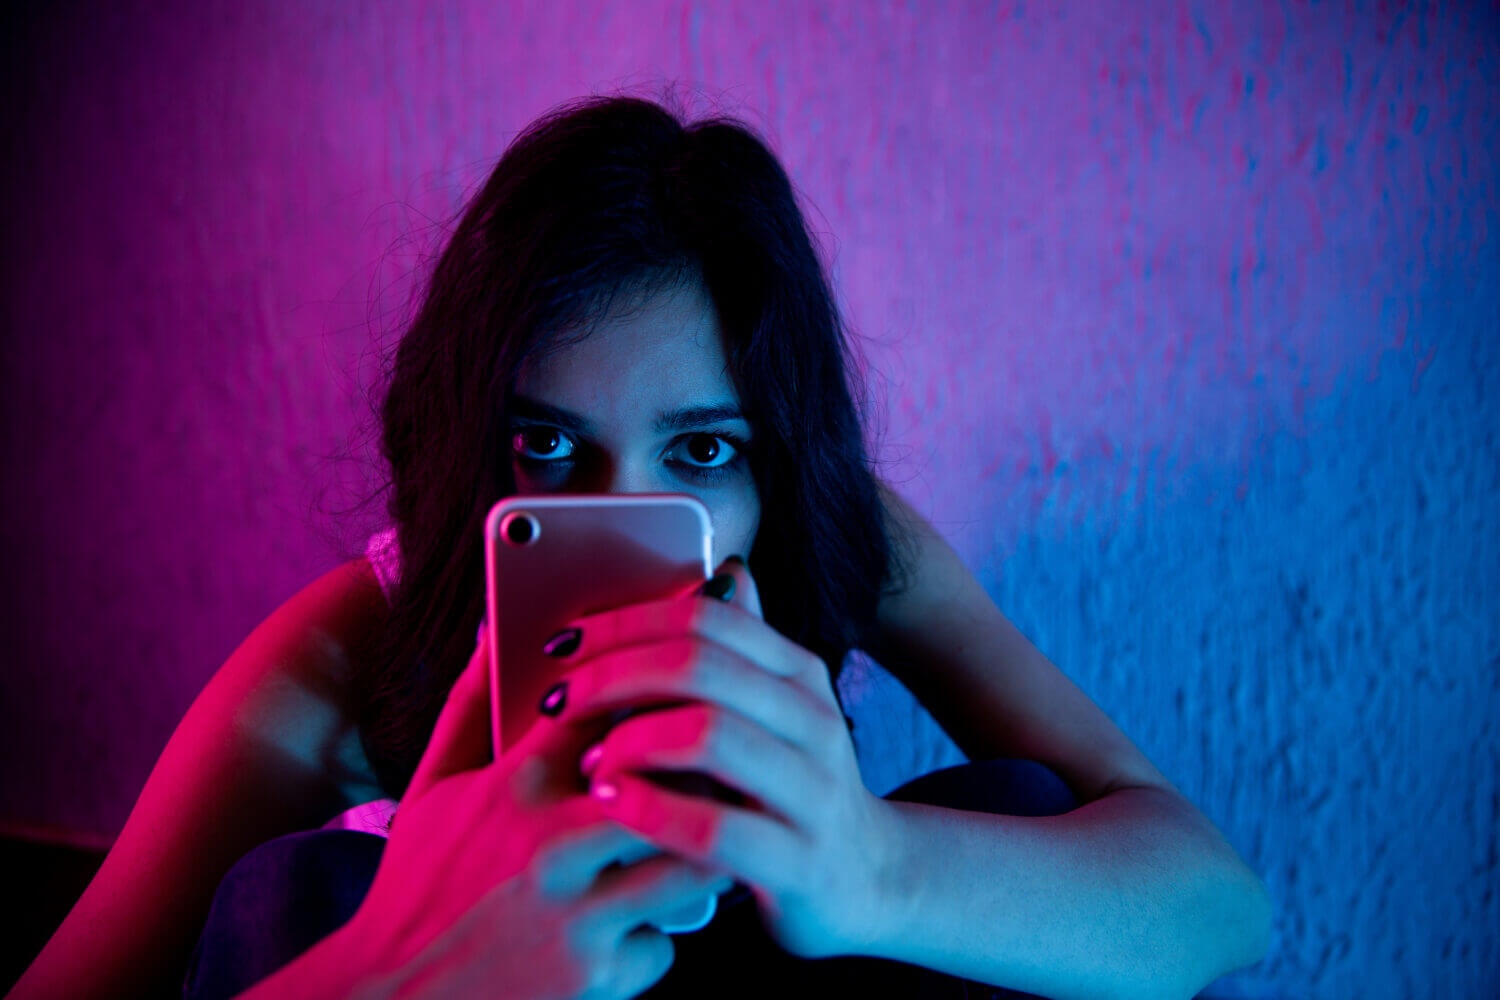 woman with a phone in a dark setting